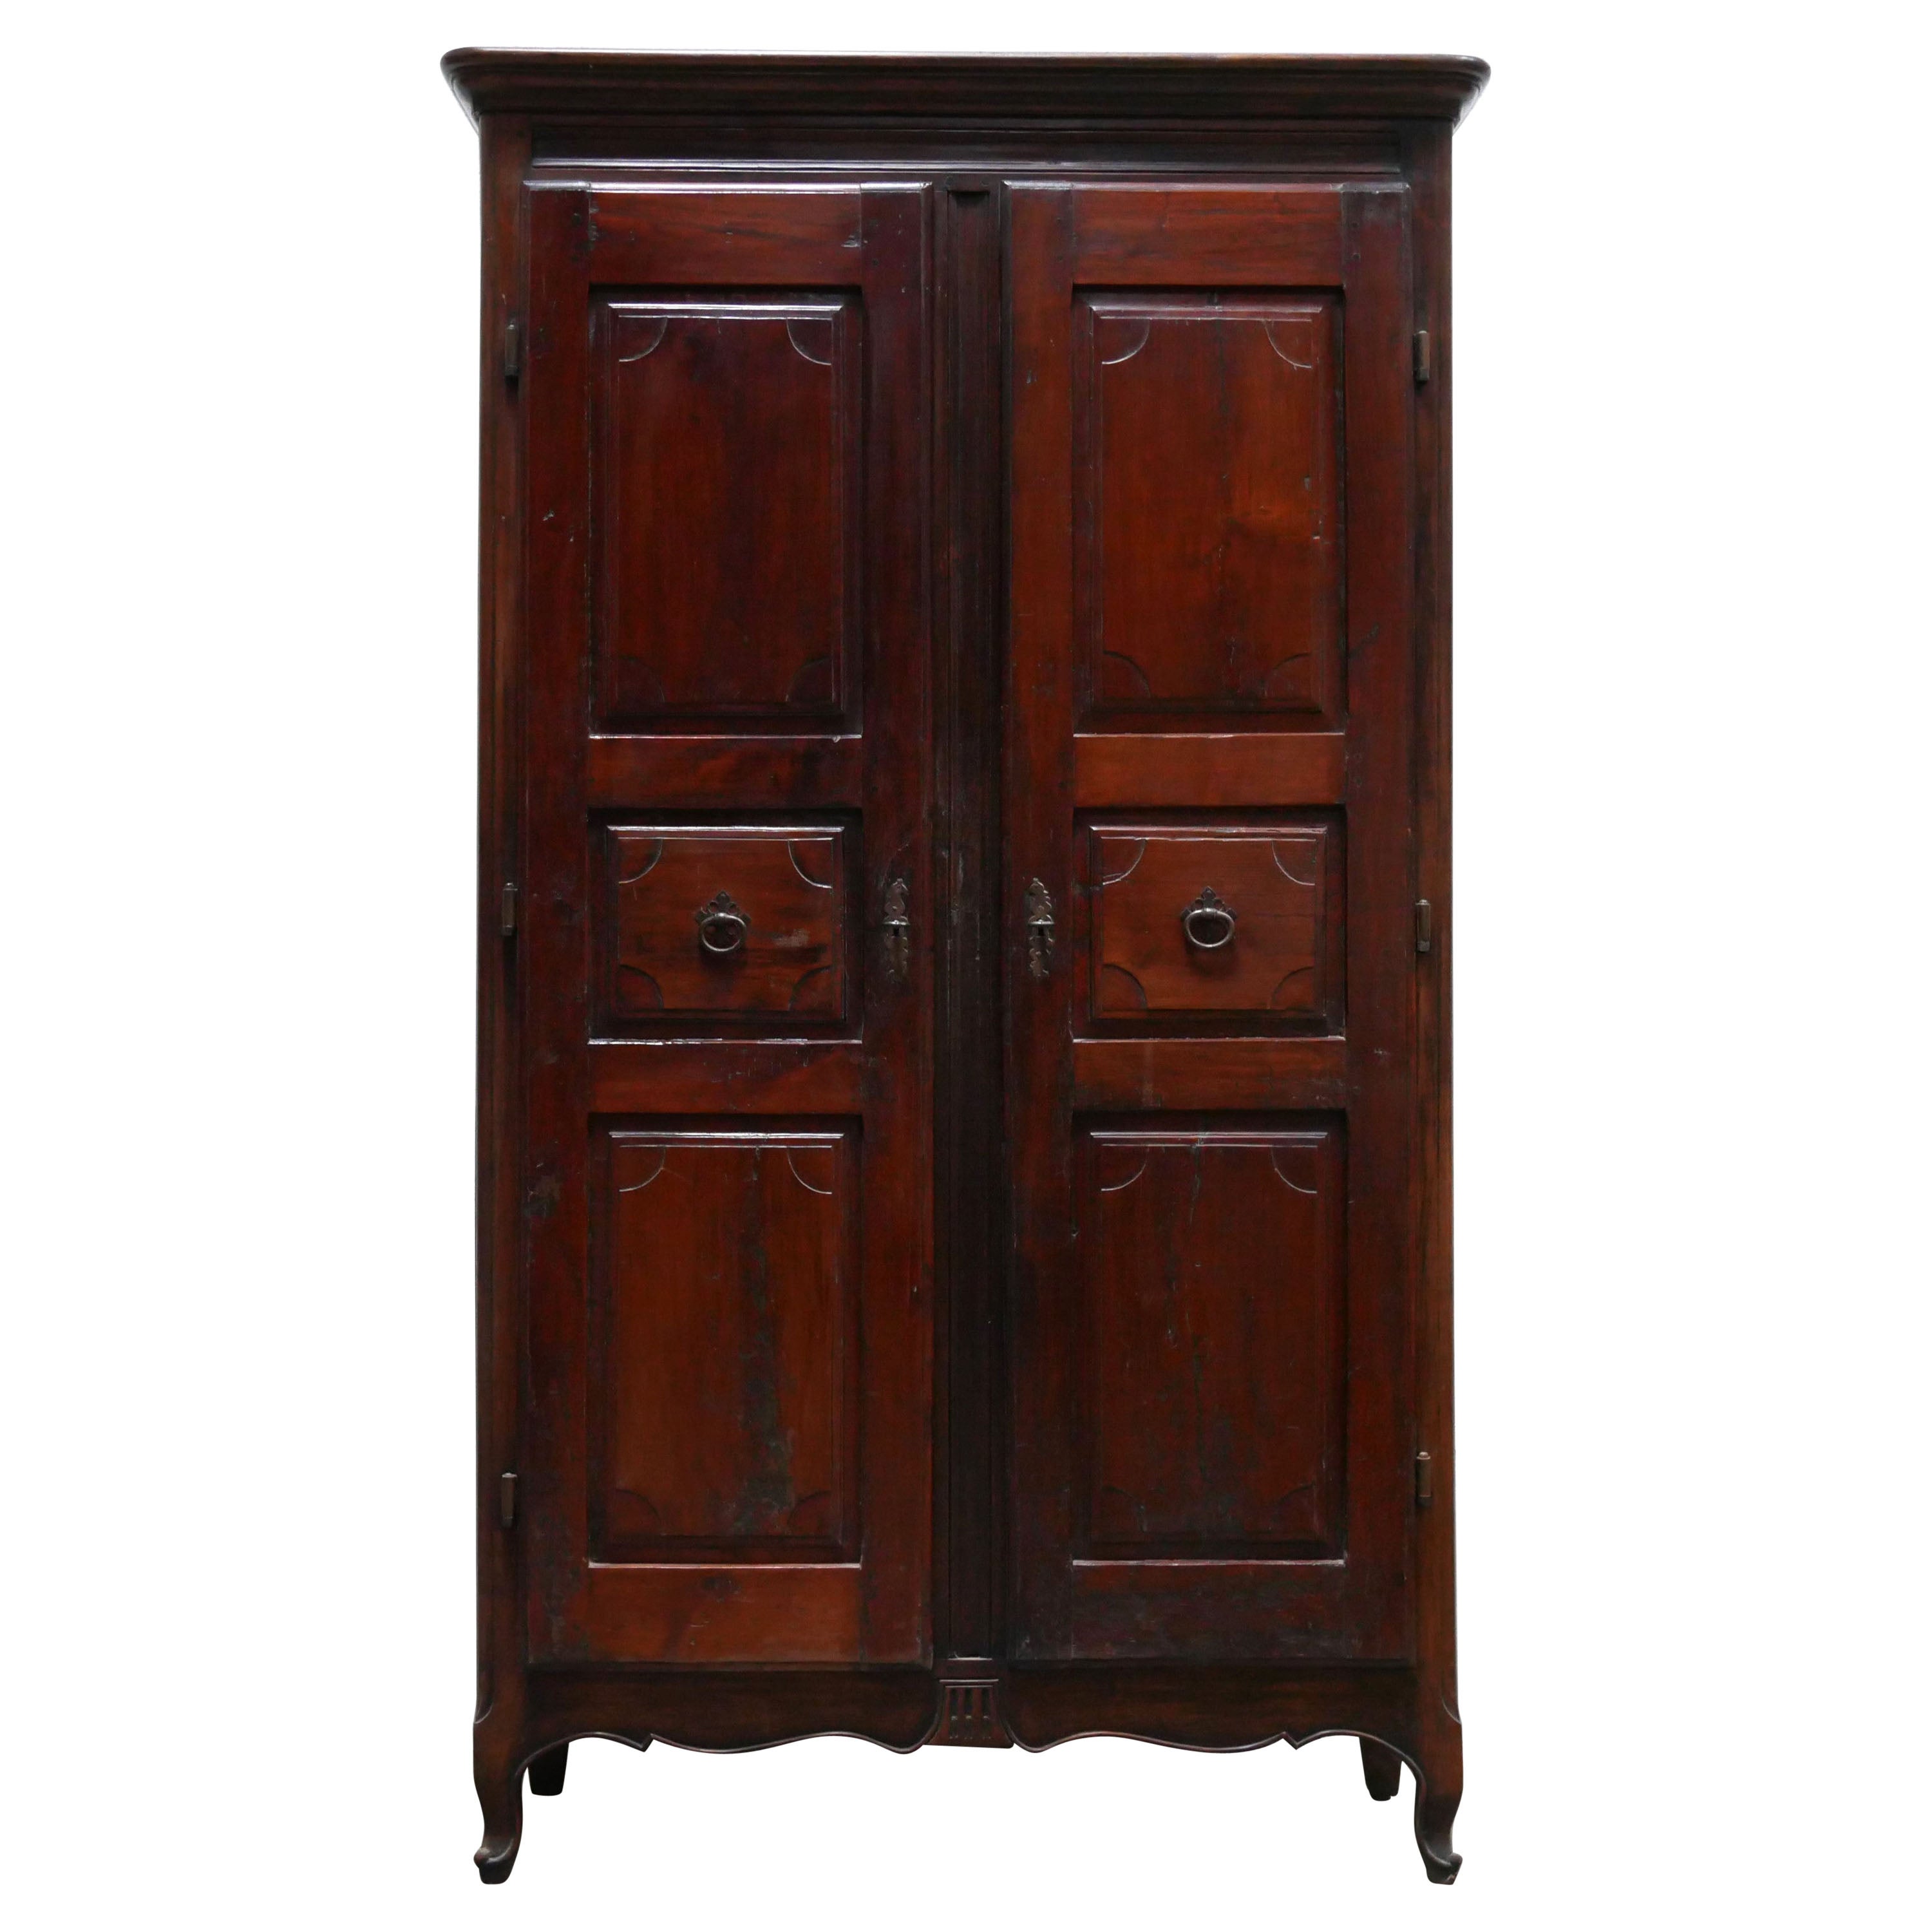 Old wooden cabinet For Sale